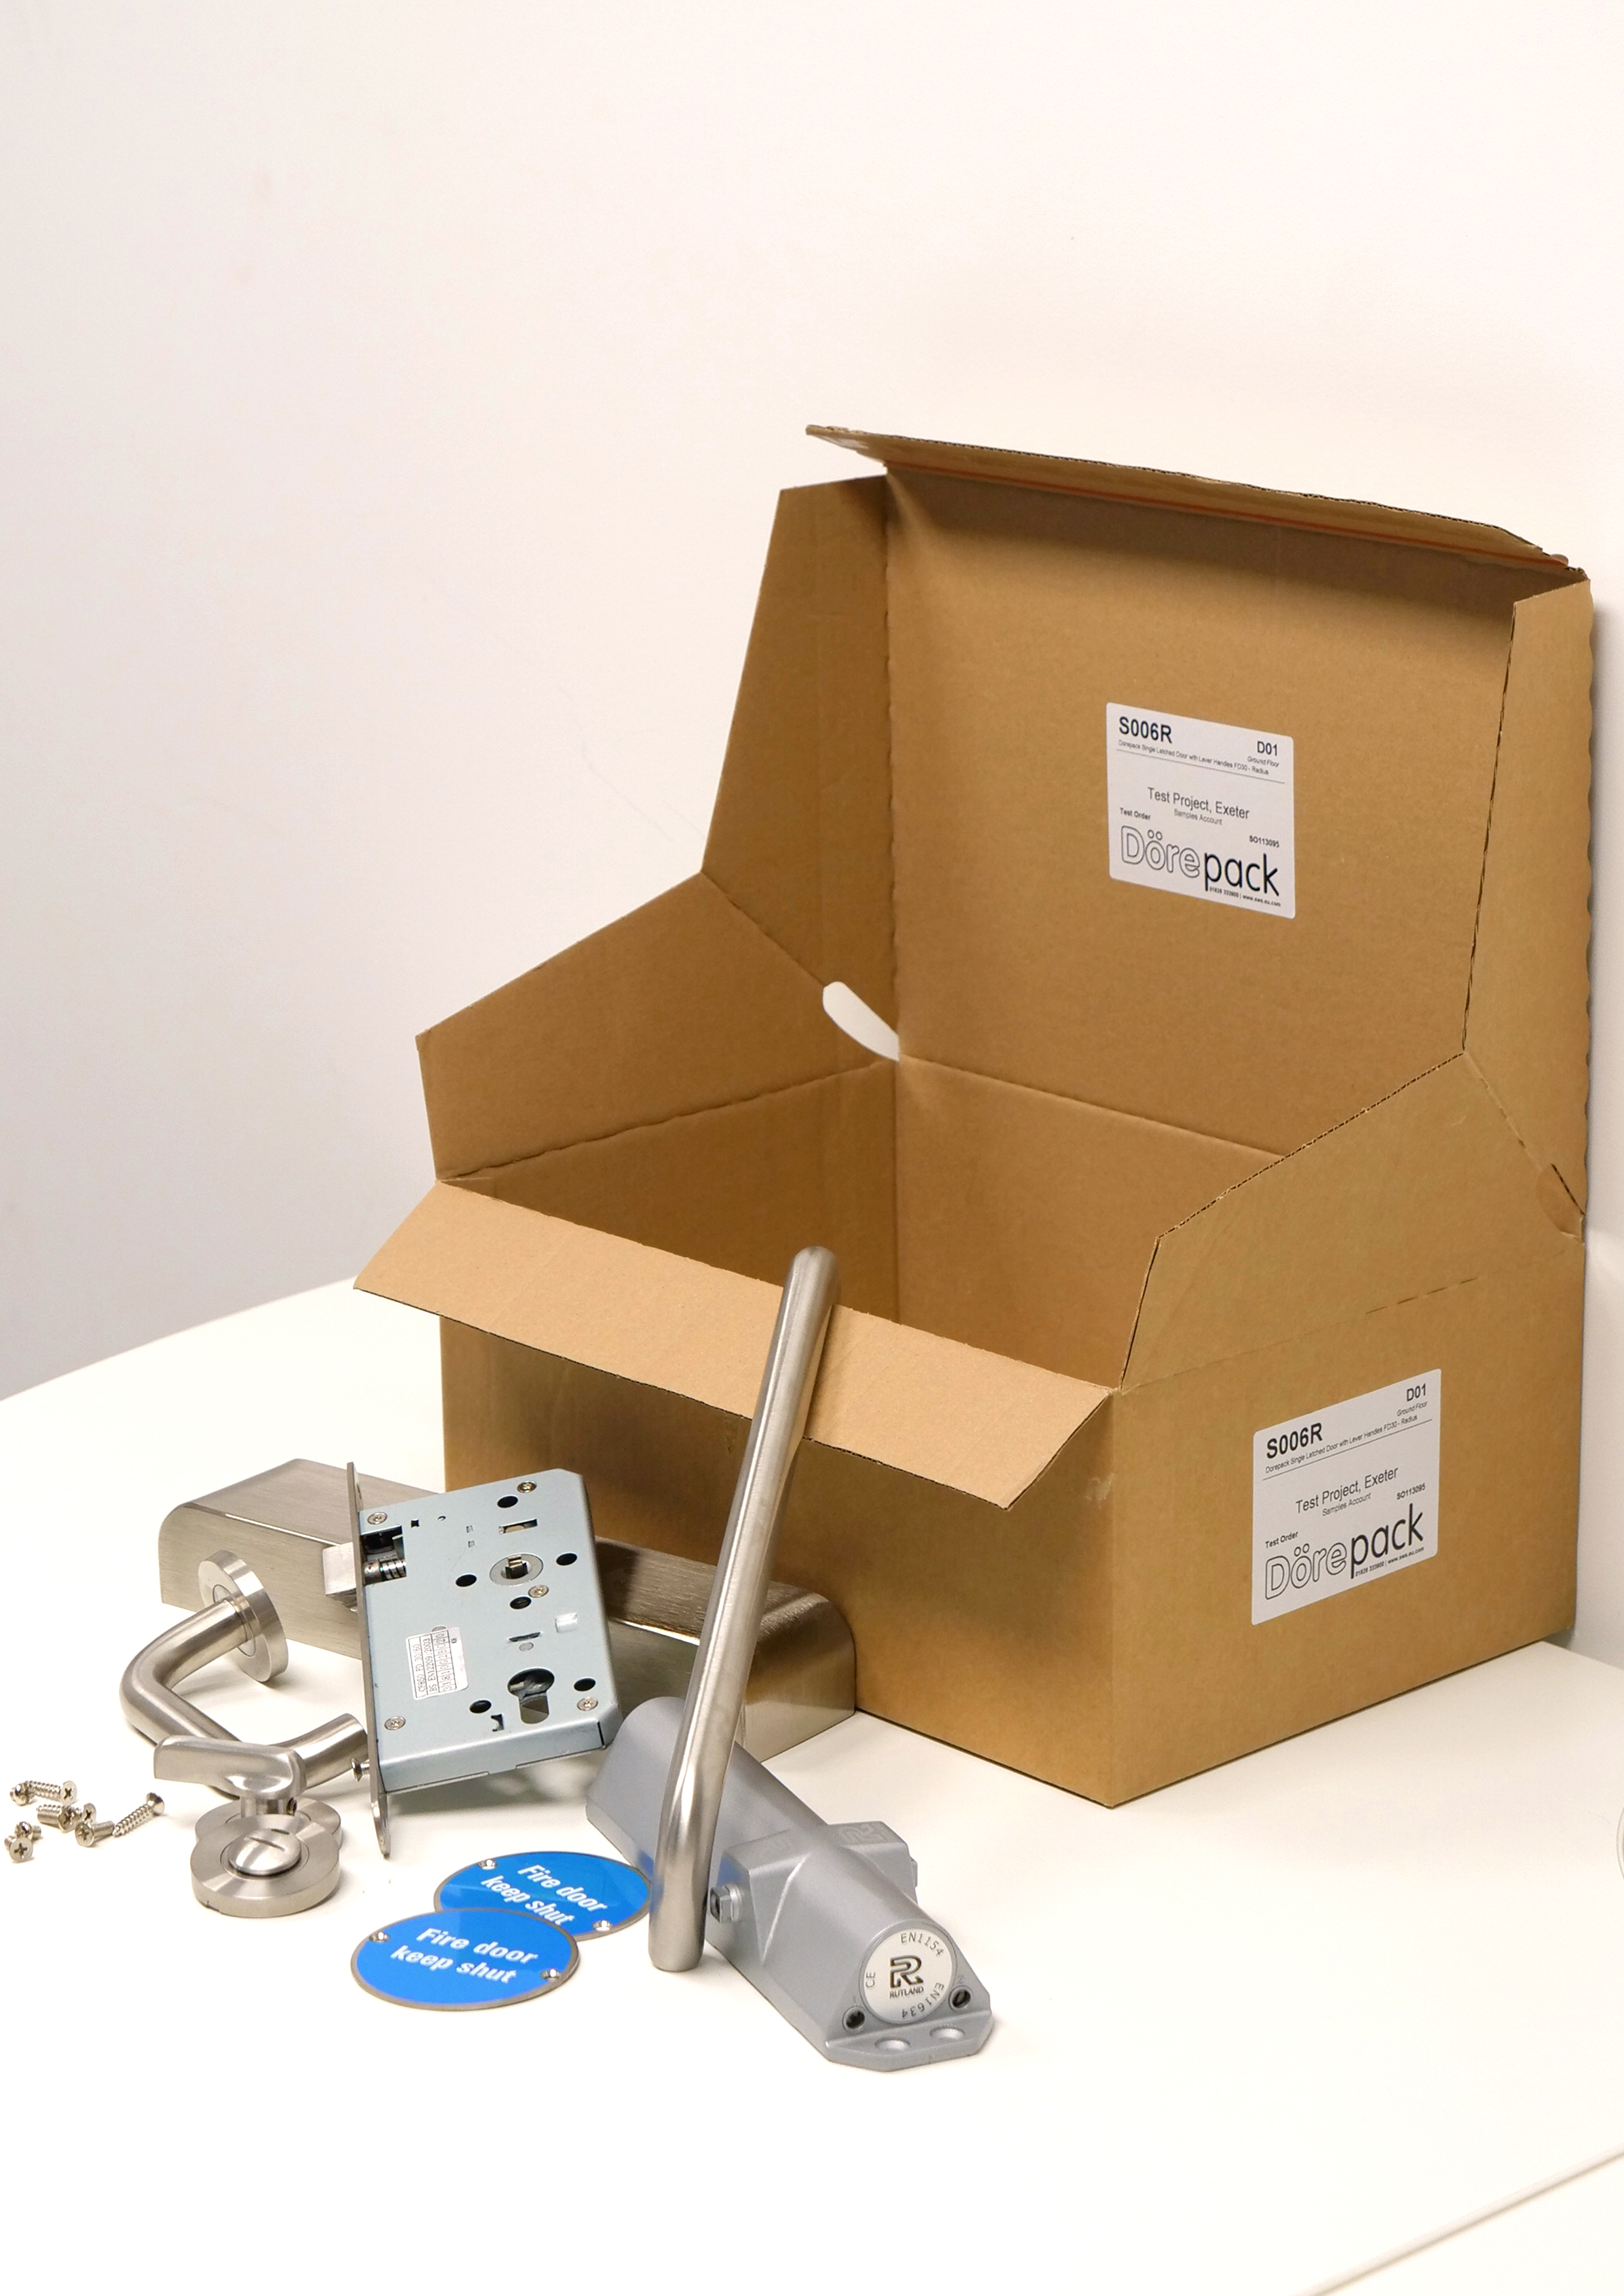 Ordering what you need is easy with these ironmongery kits.